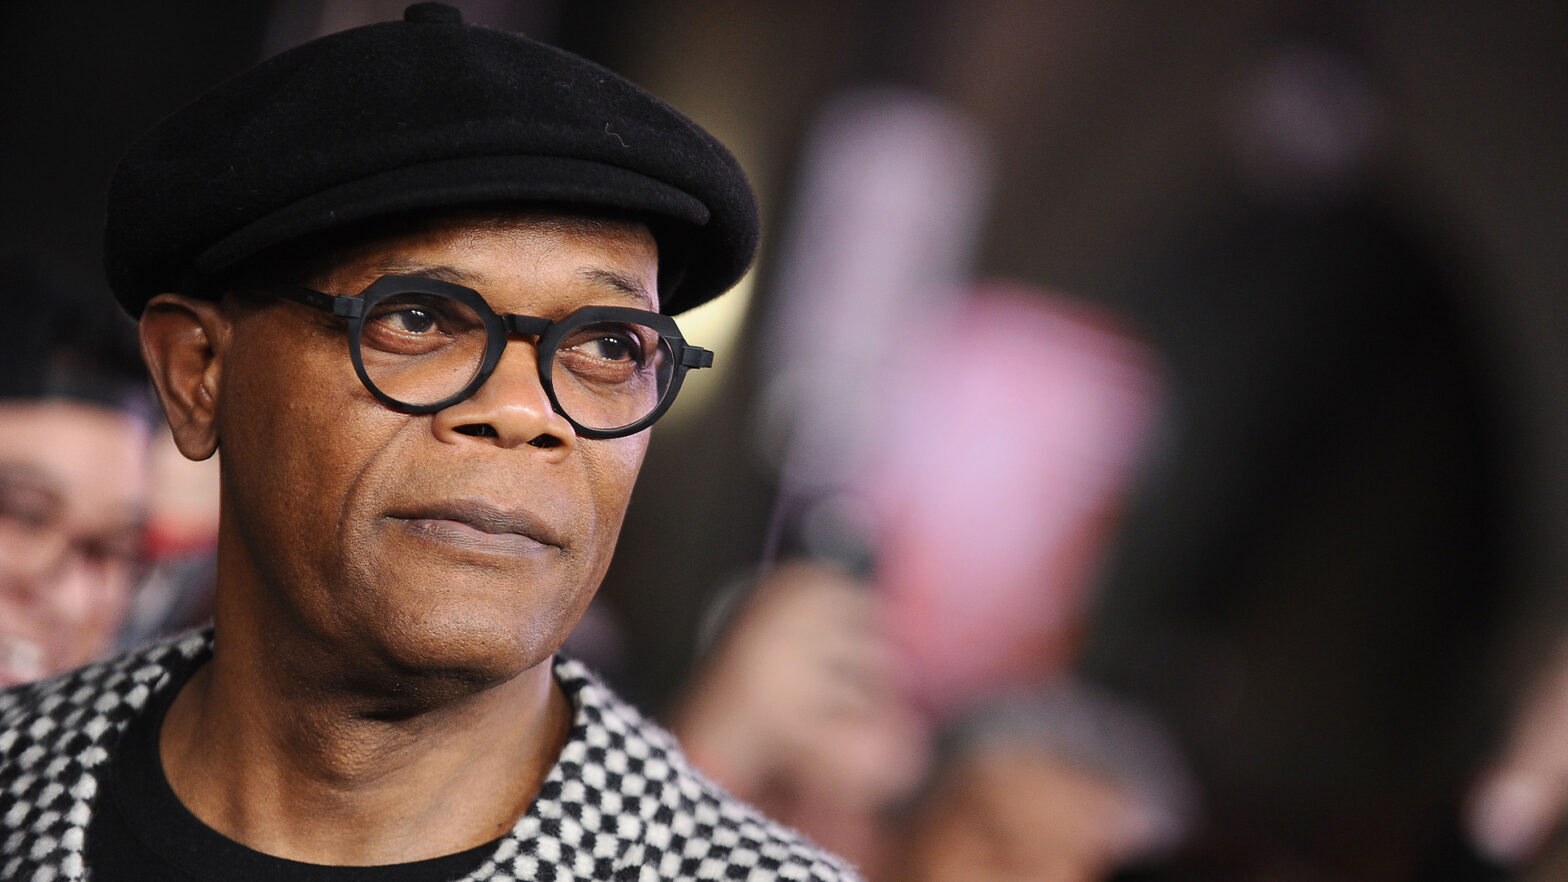 Samuel L. Jackson Disapproves Of Being Replicated By AI, For Contracts He Says, 'I Cross That Sh-t Out'